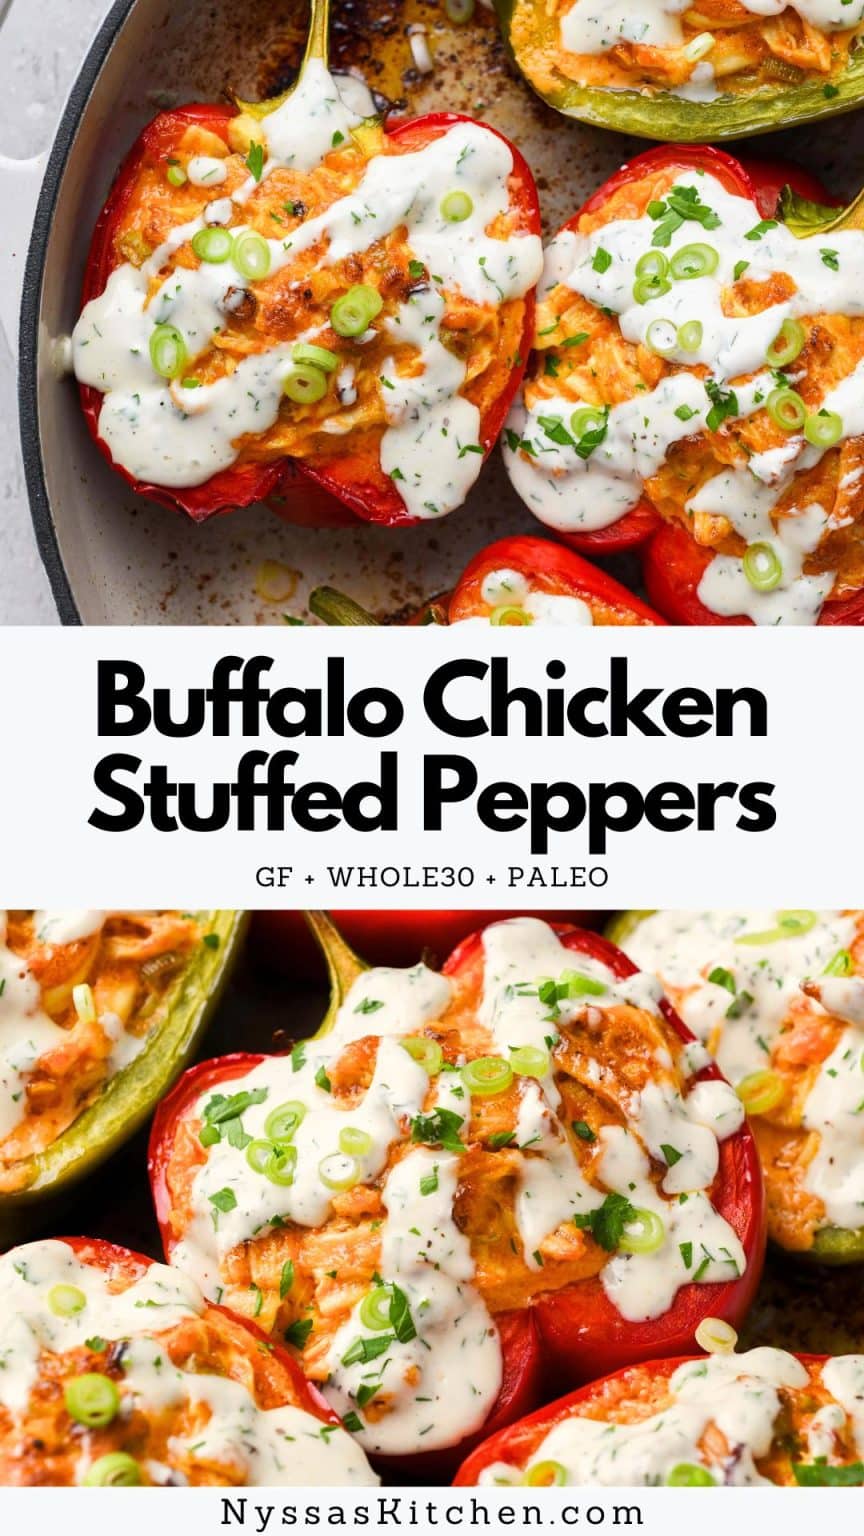 Buffalo Chicken Stuffed Peppers | Whole30, Paleo, GF, Low Carb